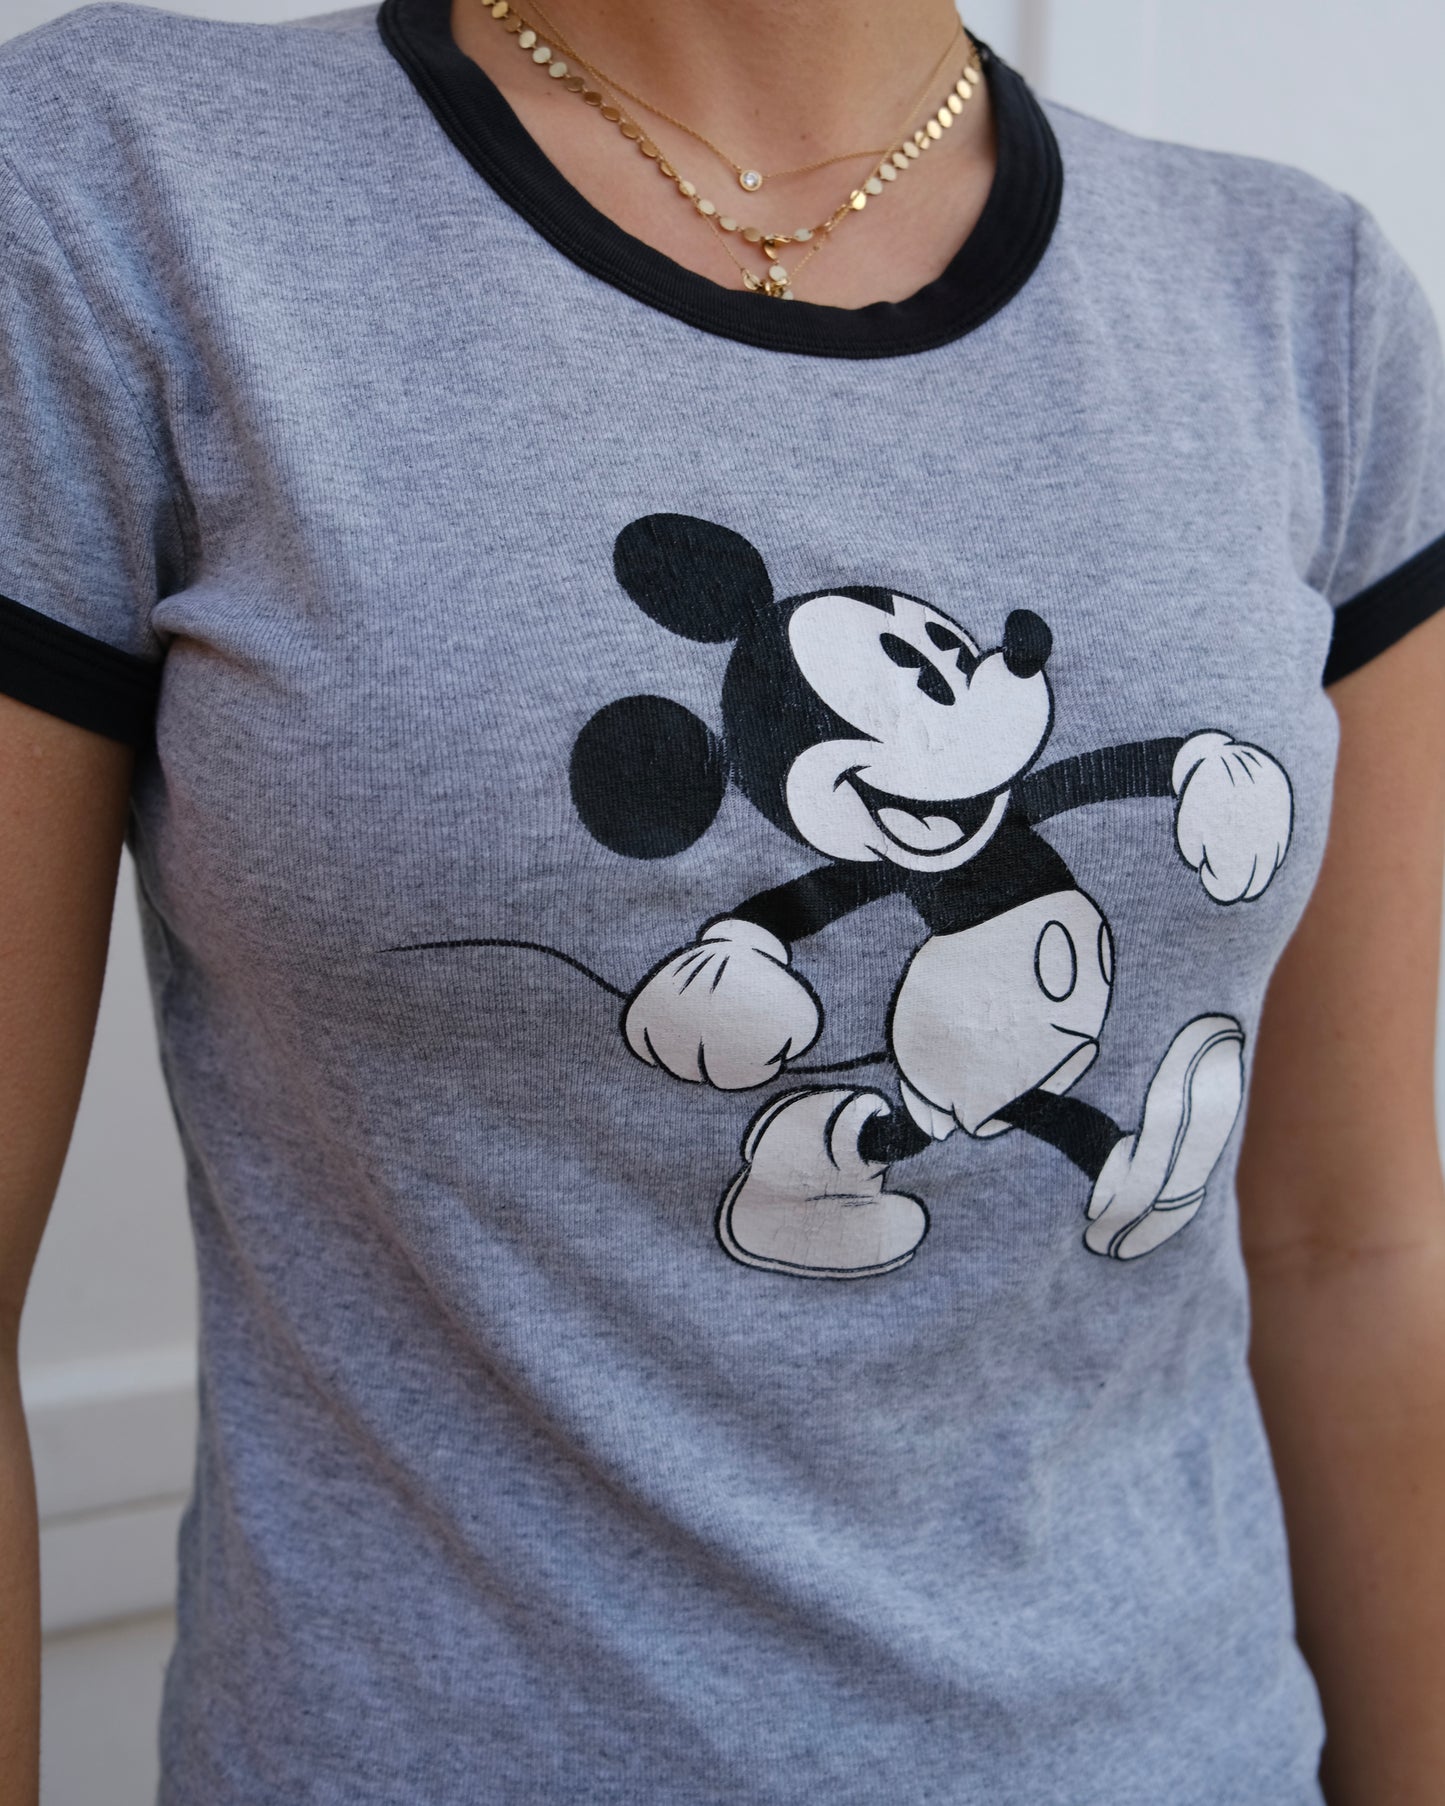 Vintage Mickey Mouse Baby Tee